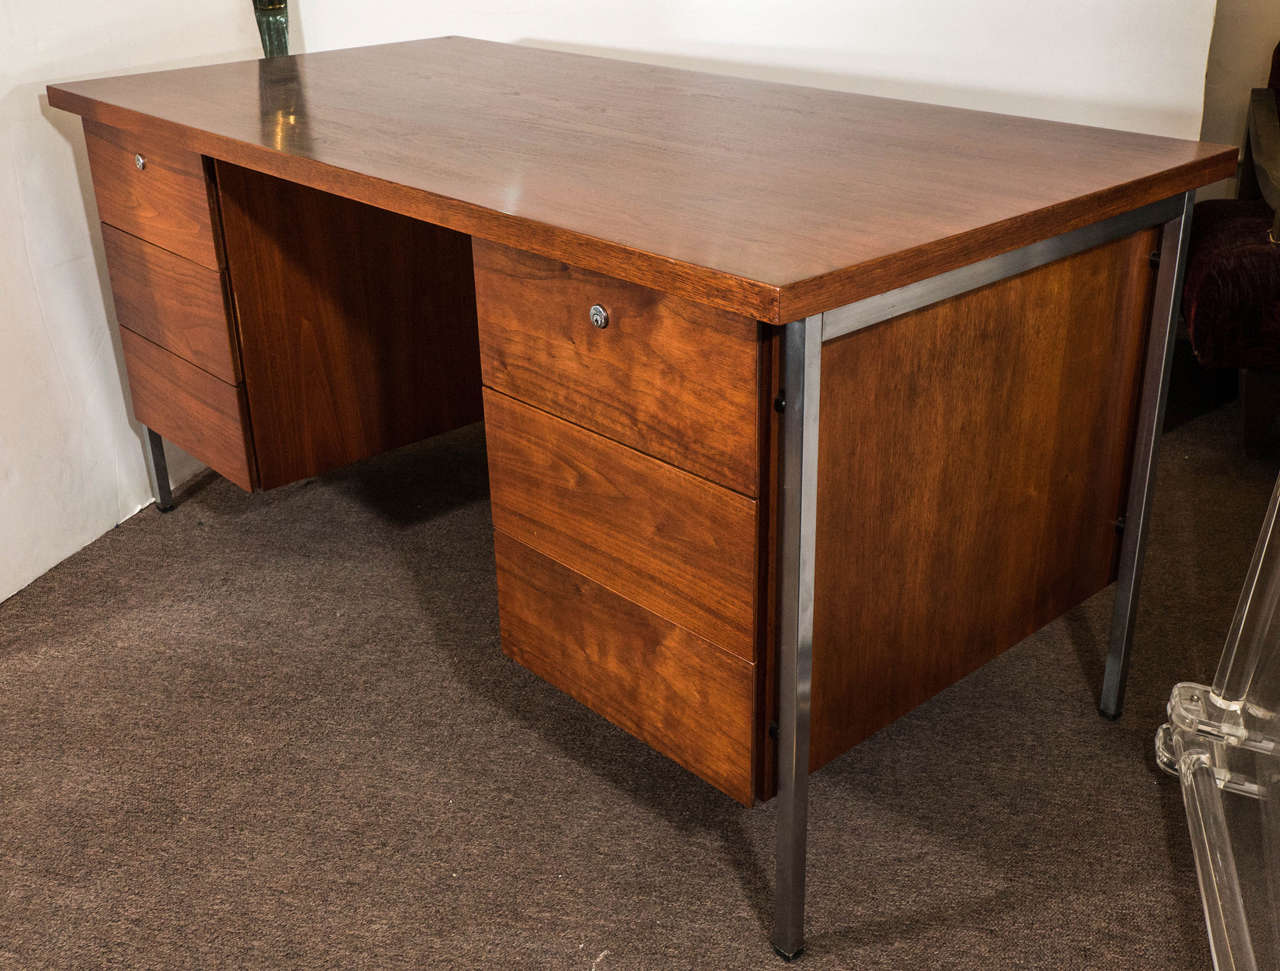 A office desk by architect Florence Knoll, in walnut, with six drawers on rectangular chrome legs, circa 1960s. Markings include original label [Knoll Associates Inc.]. Good vintage condition with some age appropriate wear on the chrome legs.